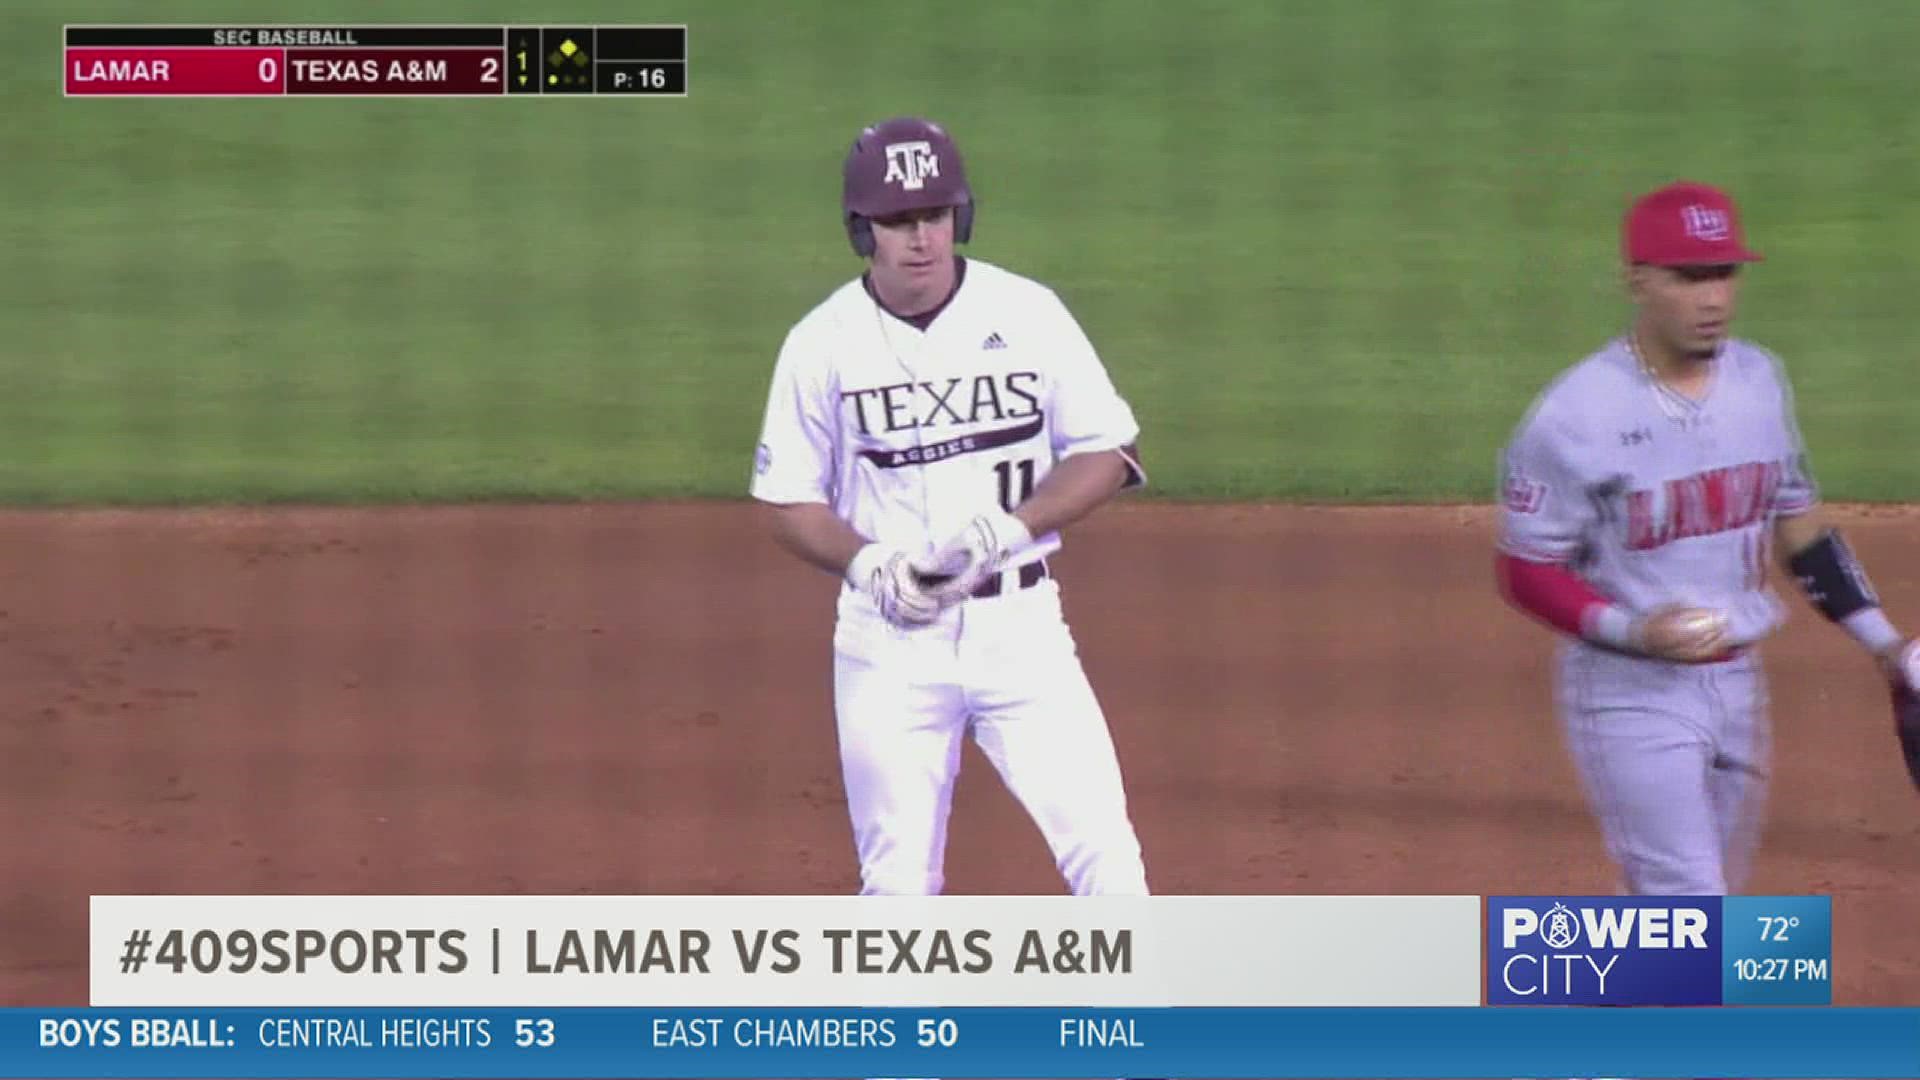 Lamar drops to (2-2) on the season with loss in Aggieland